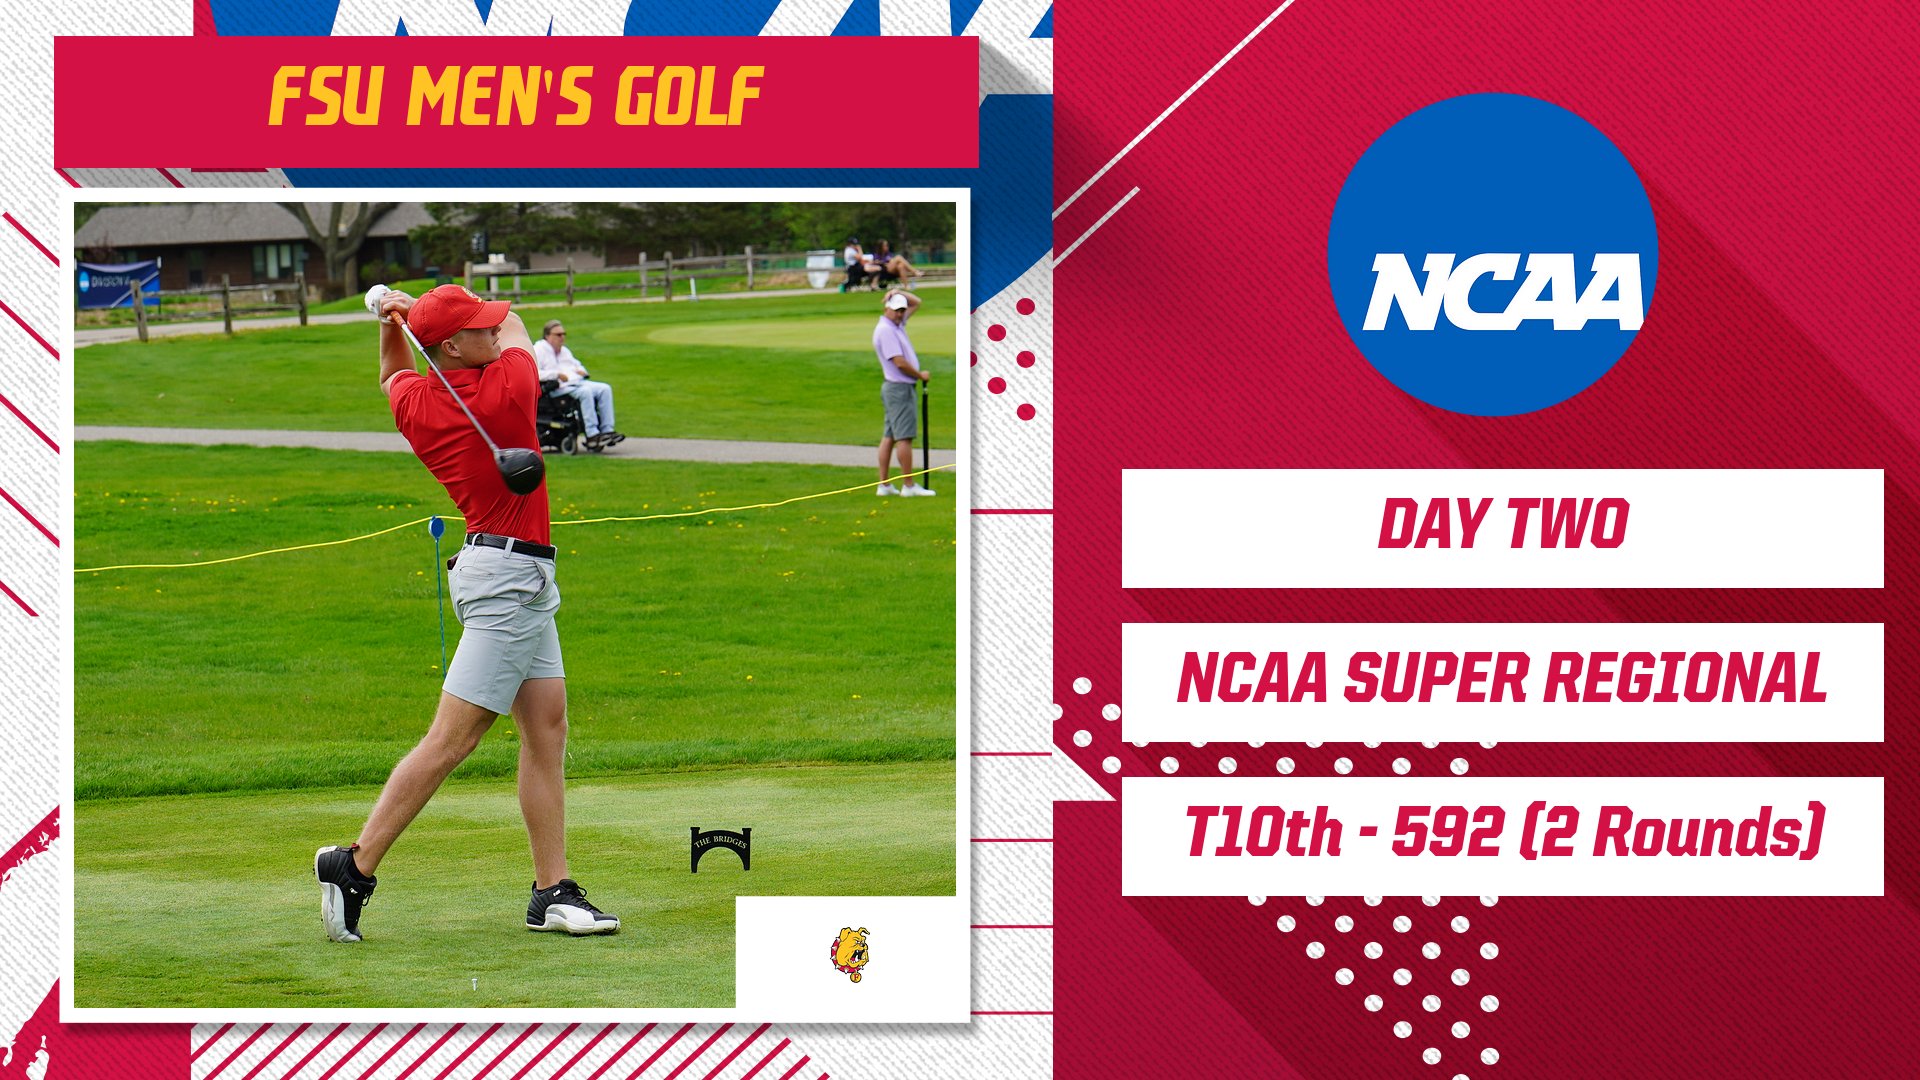 Ferris State Wraps Up Day Two Play At The NCAA Super Regional Championships